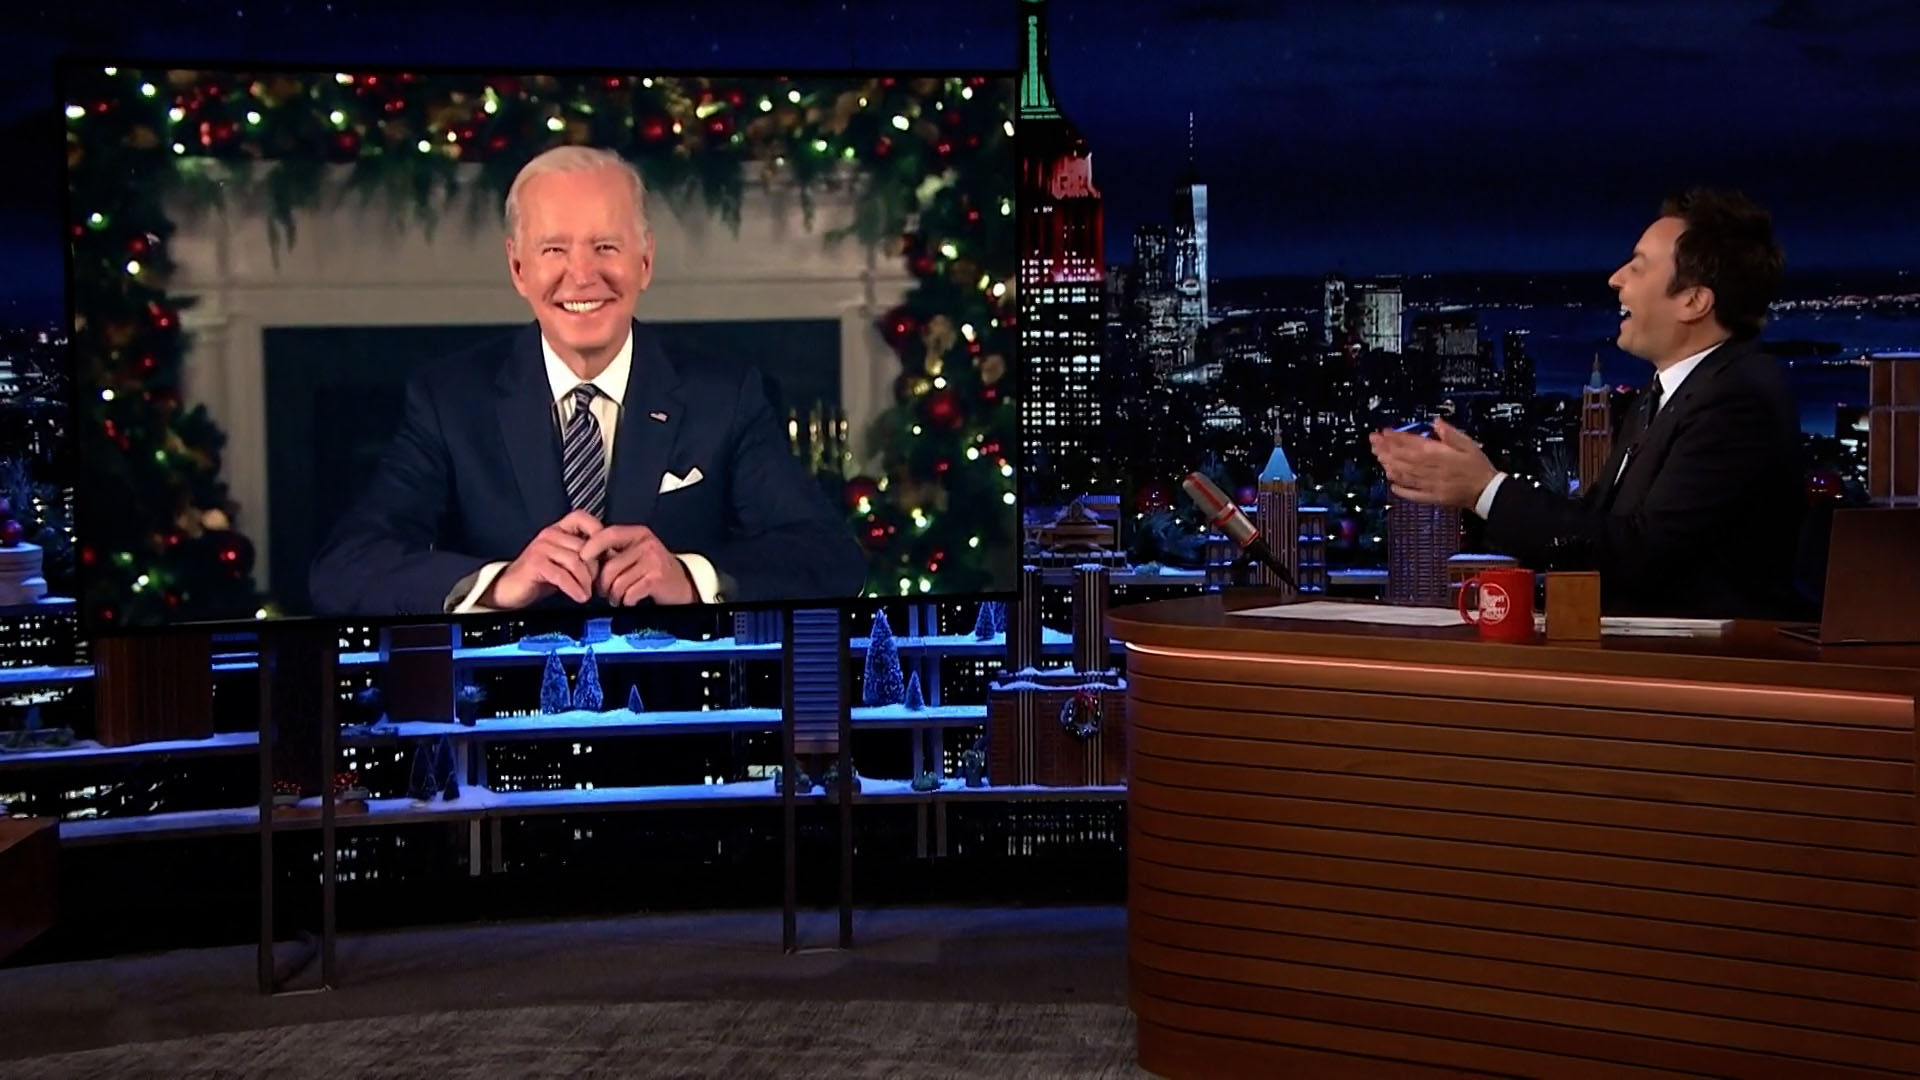 Biden breaks down infrastructure, Covid and approval rating on ‘The Tonight Show’